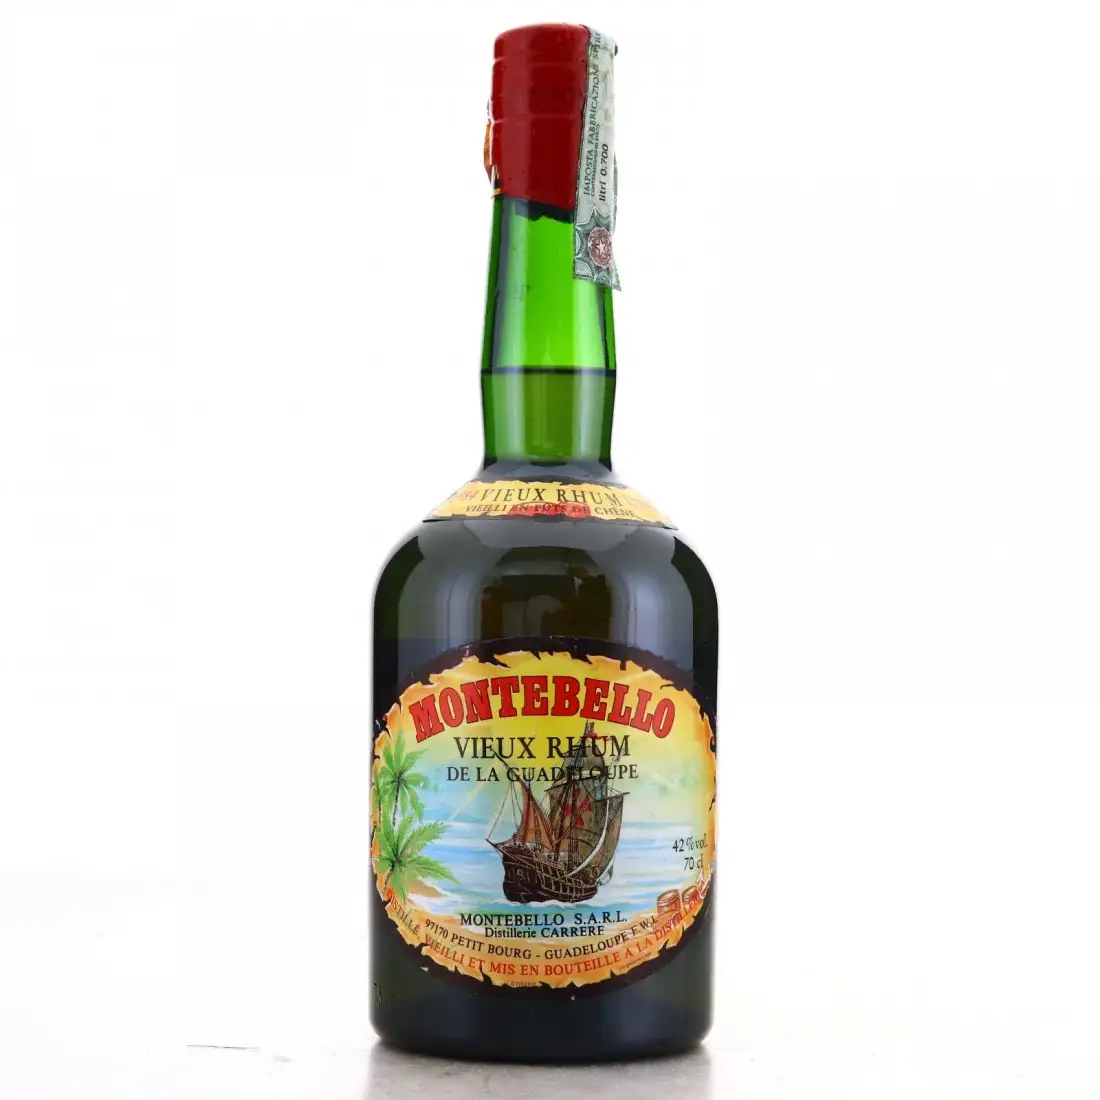 Image of the front of the bottle of the rum Montebello Vieux Rhum